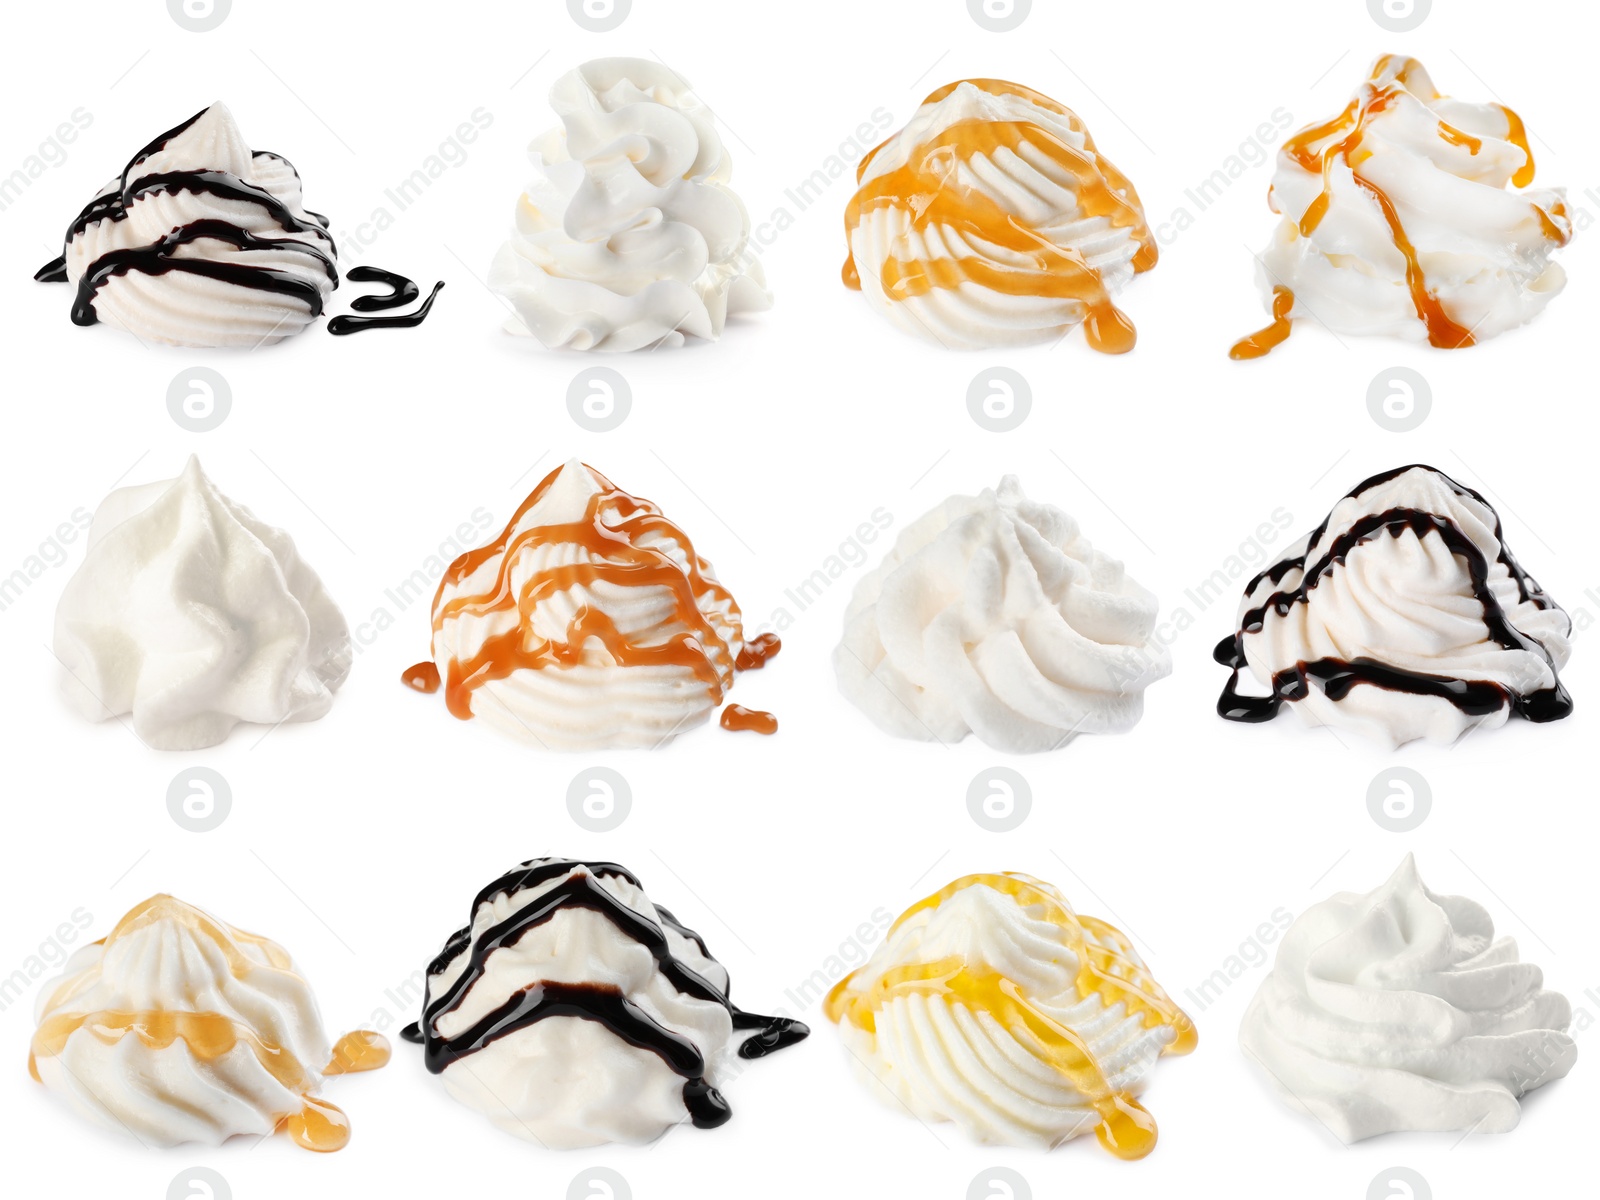 Image of Set with delicious fresh whipped cream on white background